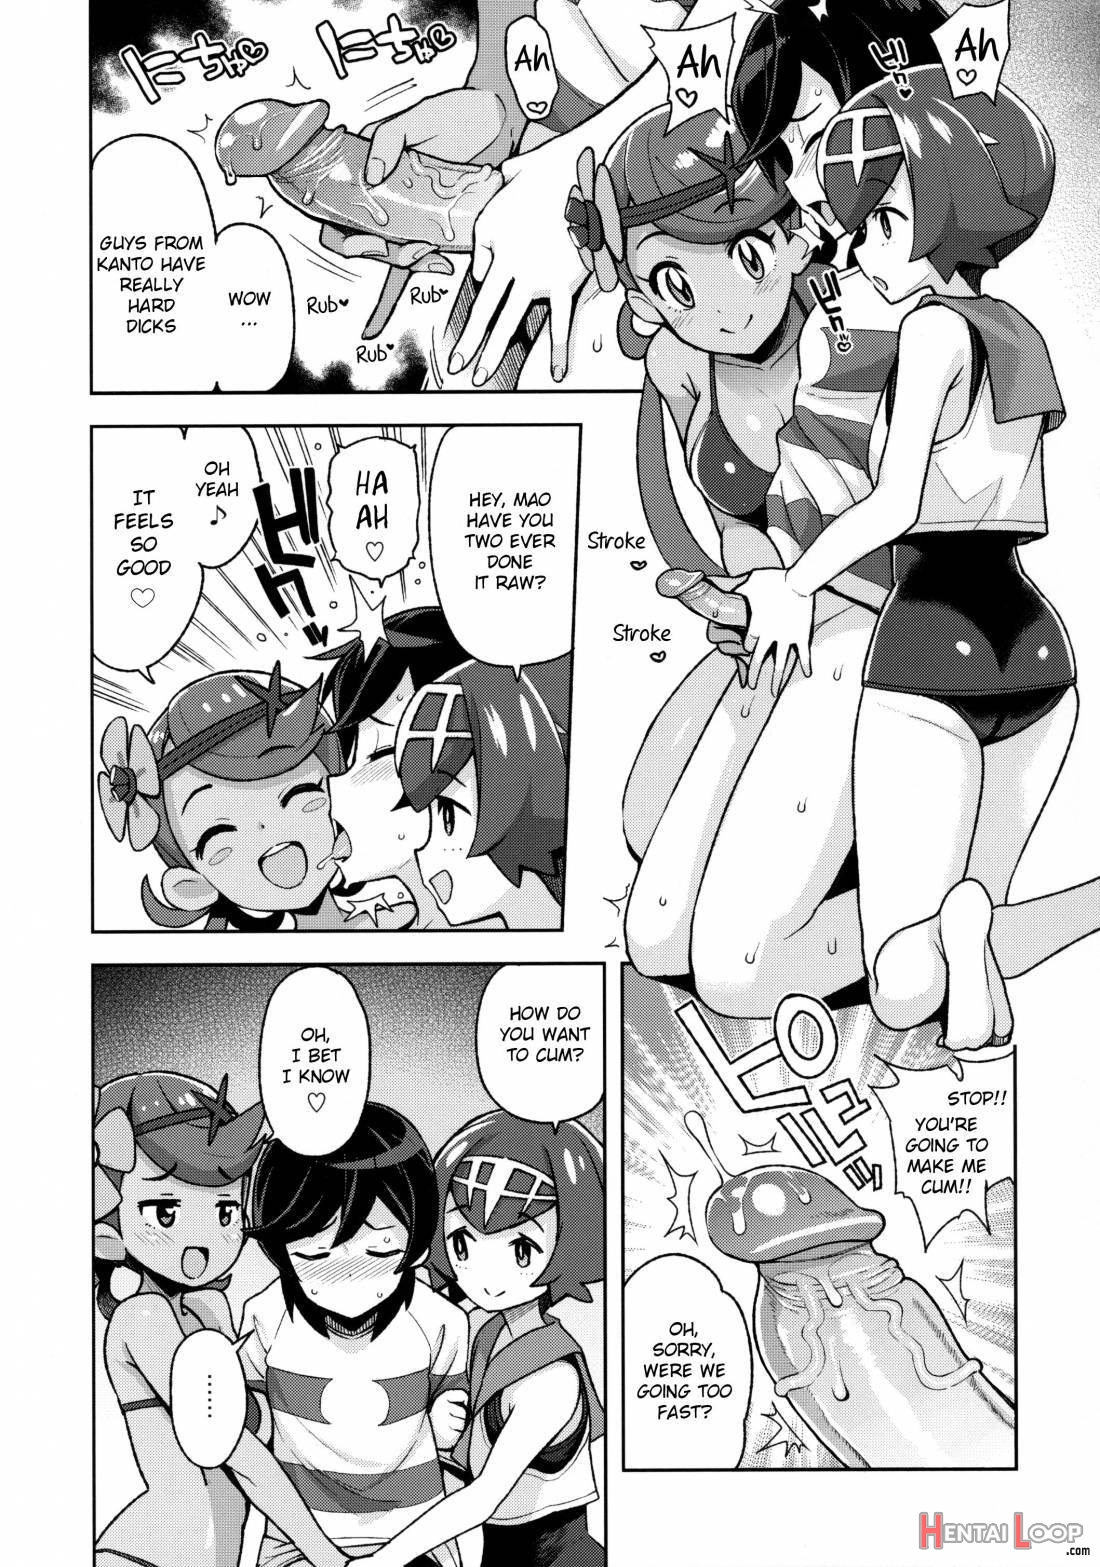 MAO FRIENDS2 page 6